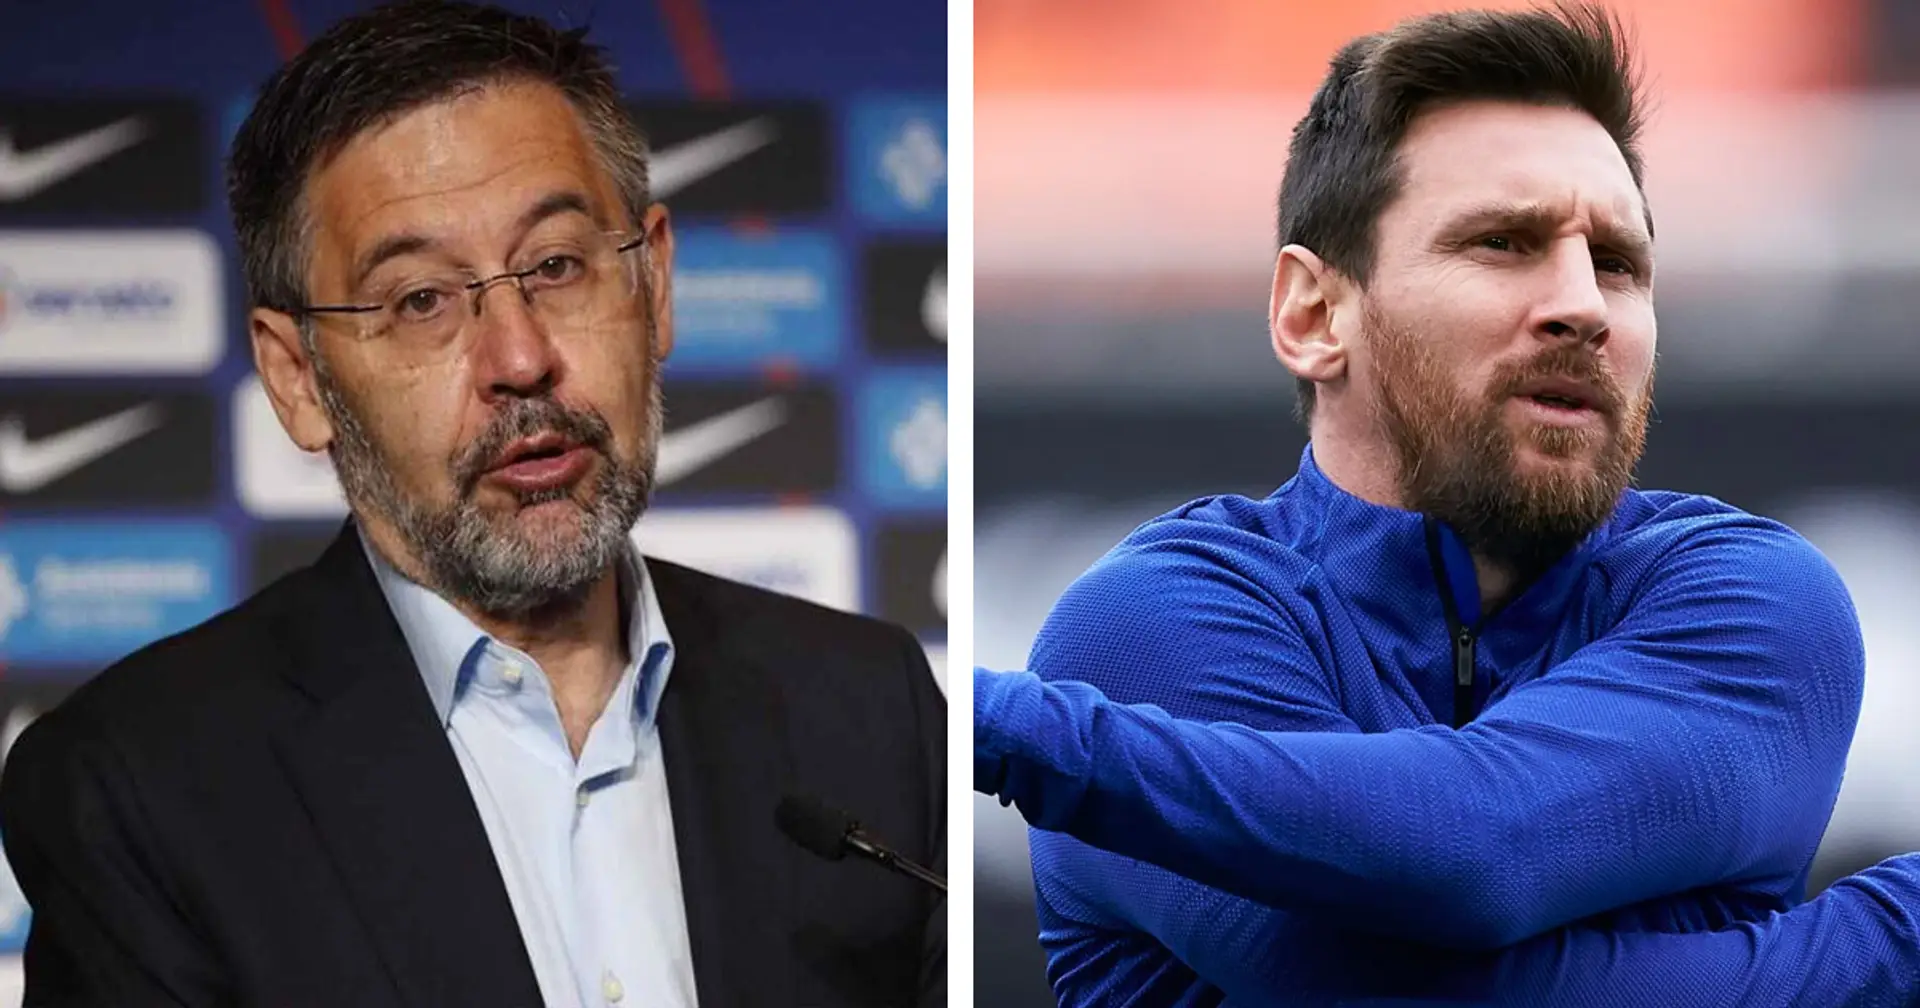 Bartomeu's poor problem-solving indicates how Messi saga will end: 5 times Barca president tried to save face and how it backfired